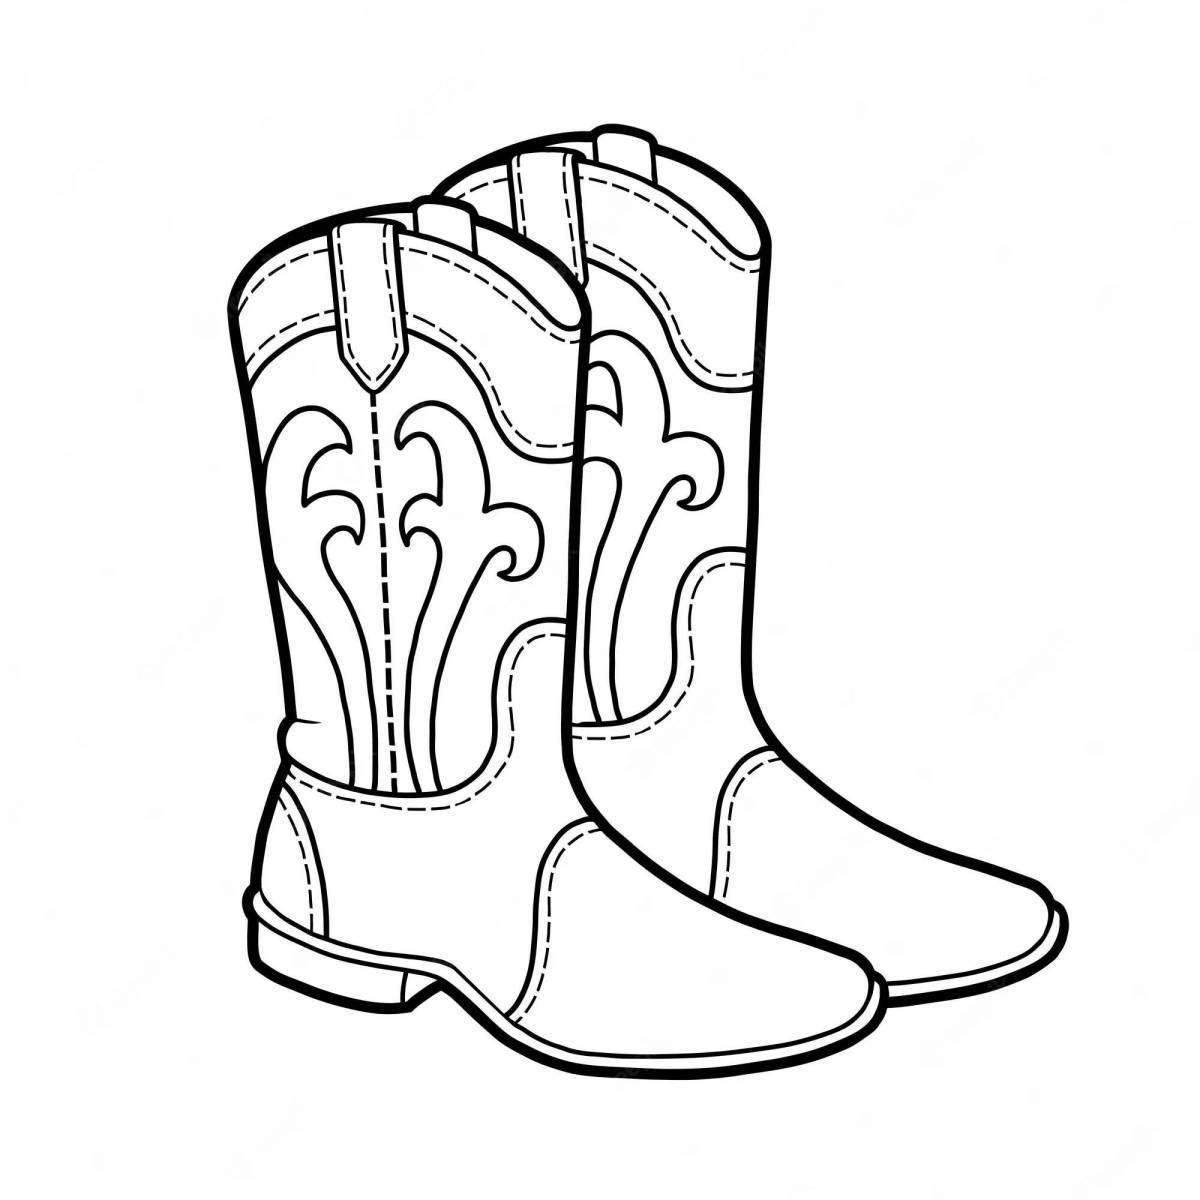 Impressive Tatar boot coloring page